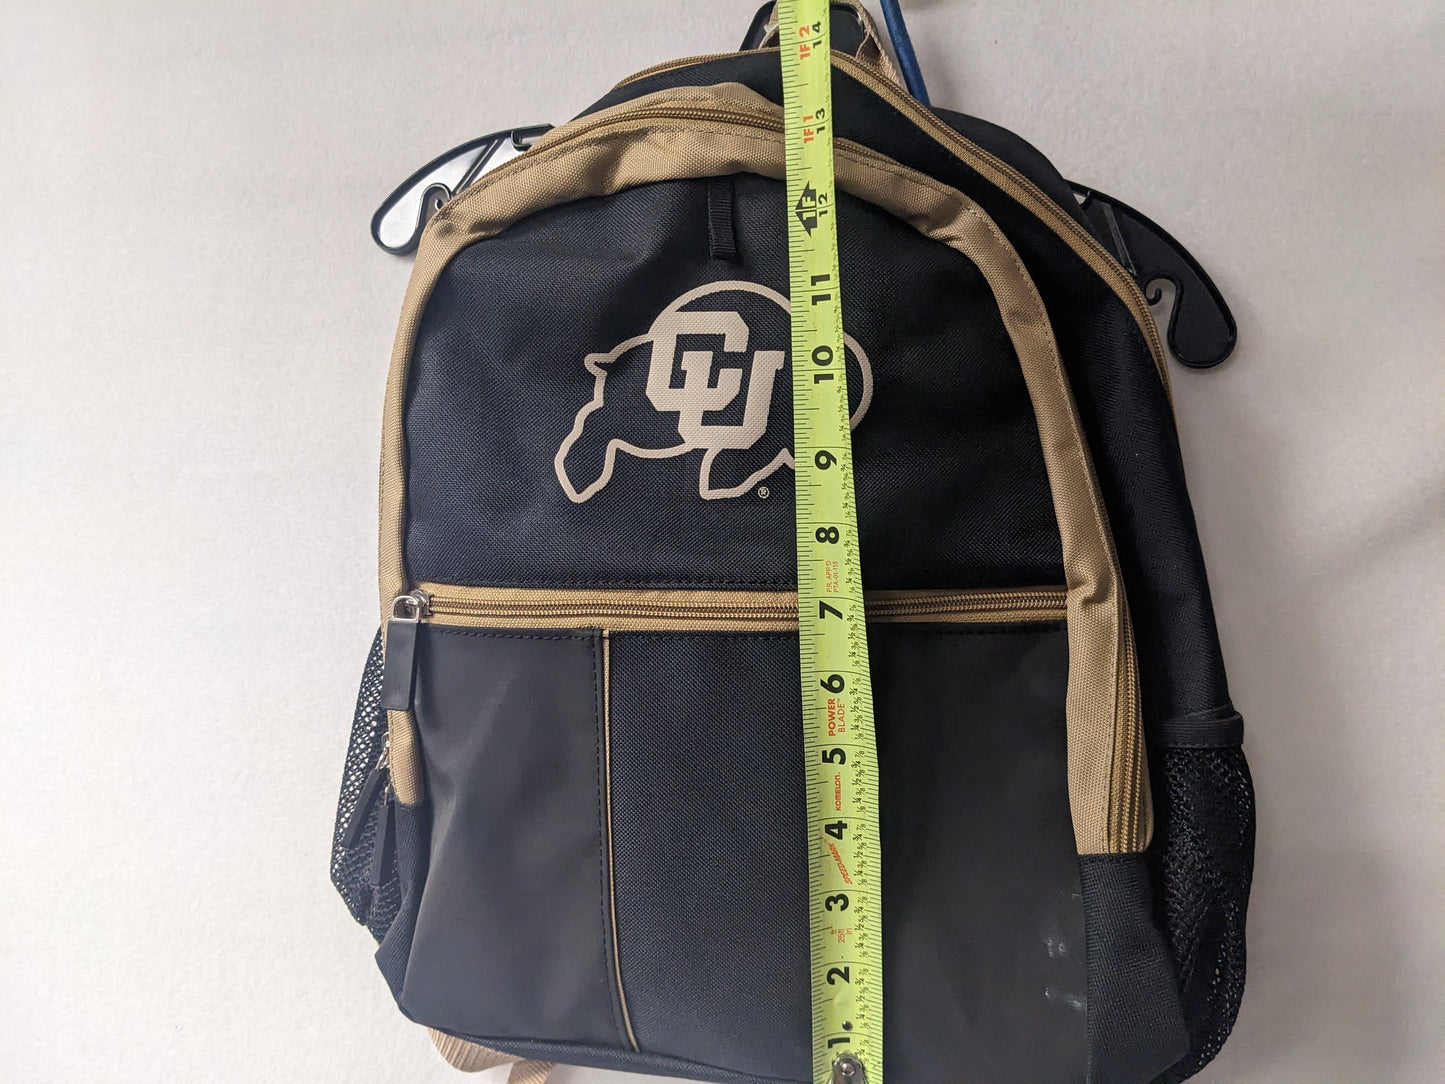 Logo Backpack CU Buffaloes Size 10x6x16 In